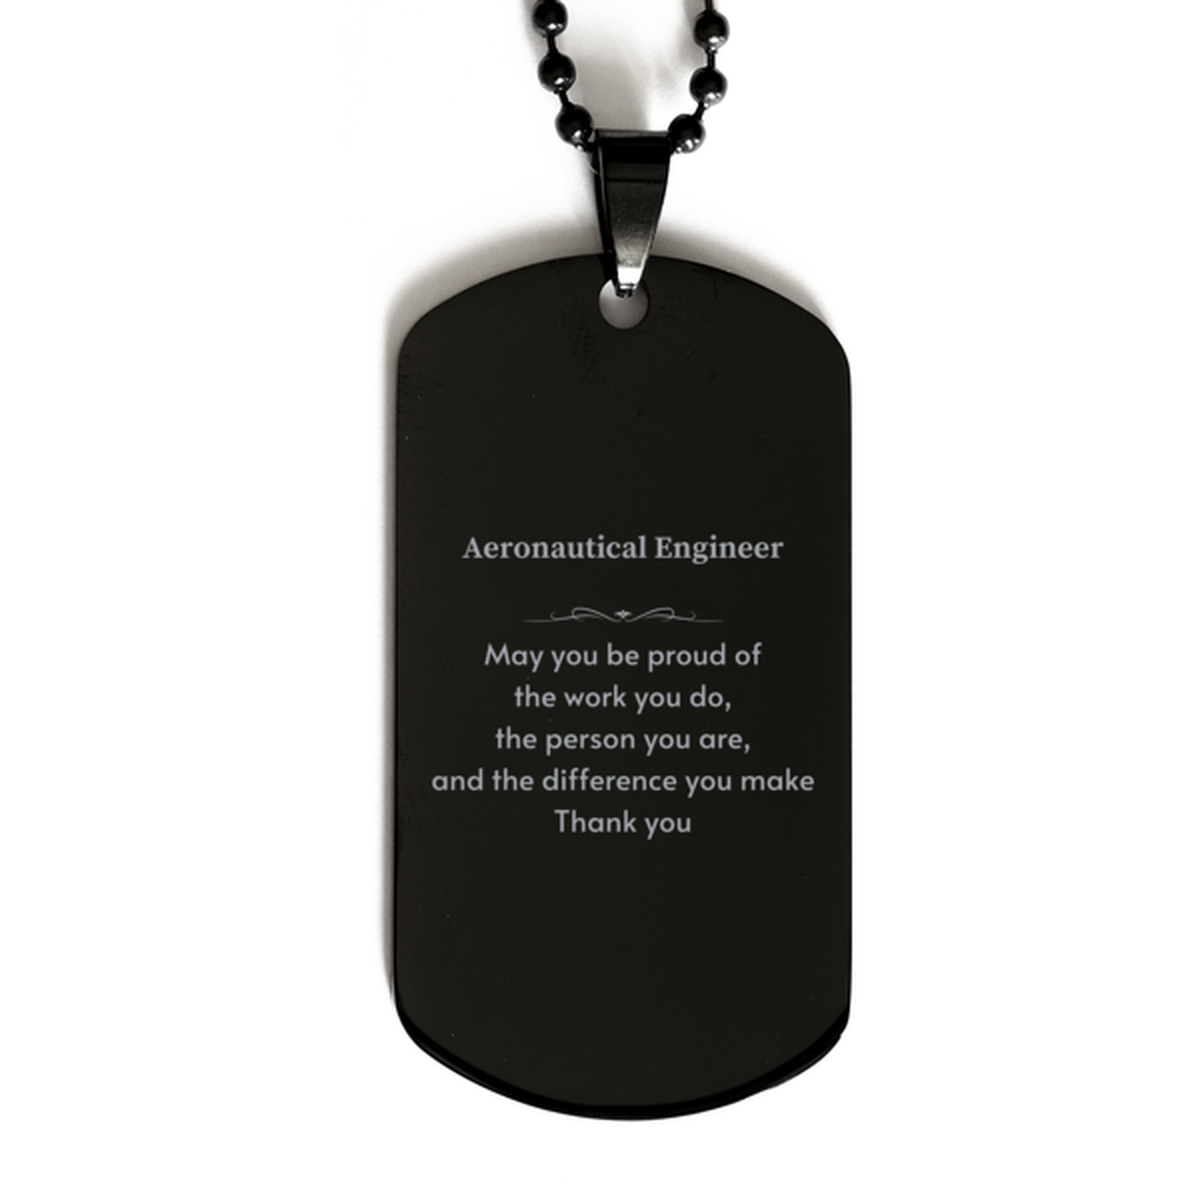 Heartwarming Black Dog Tag Retirement Coworkers Gifts for Aeronautical Engineer, Aeronautical Engineer May You be proud of the work you do, the person you are Gifts for Boss Men Women Friends